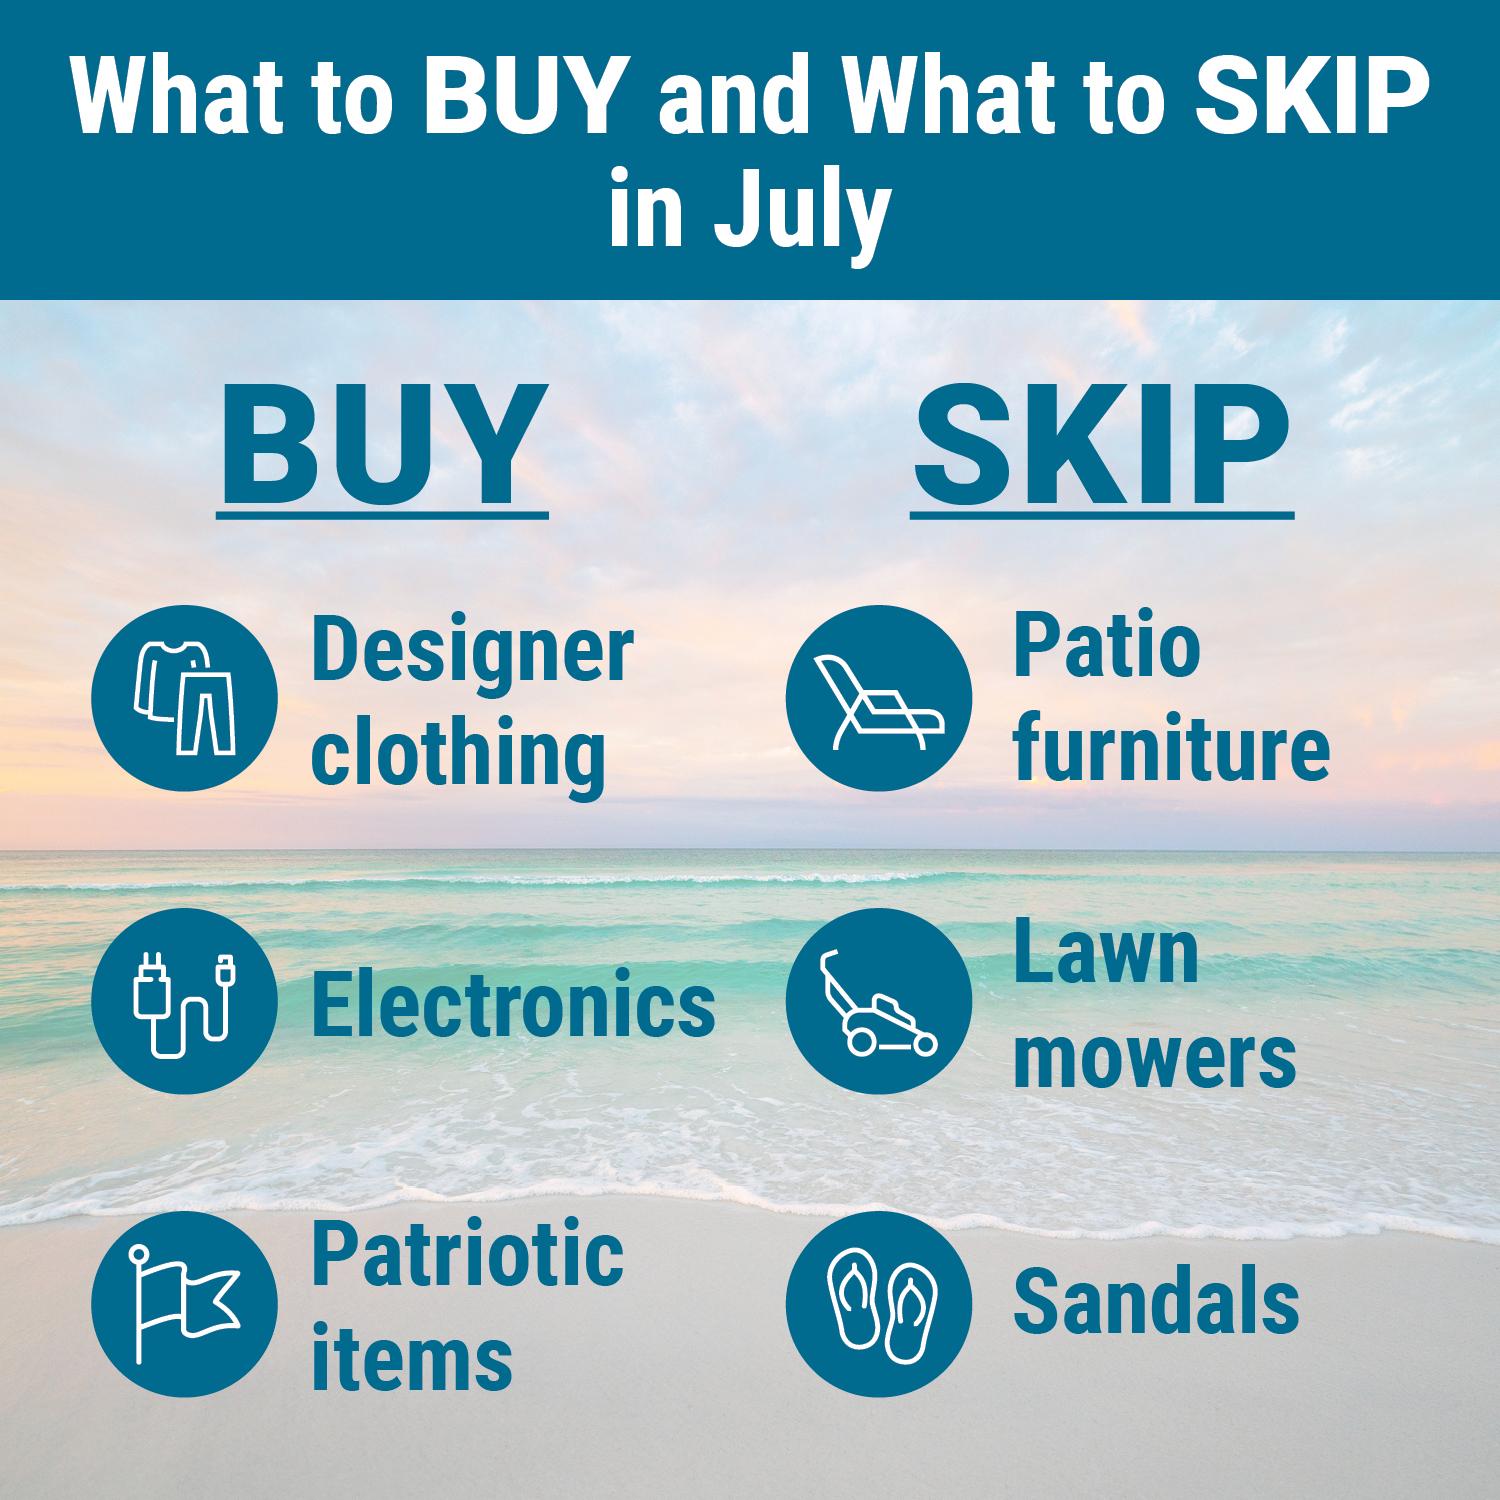 What to buy and skip in July